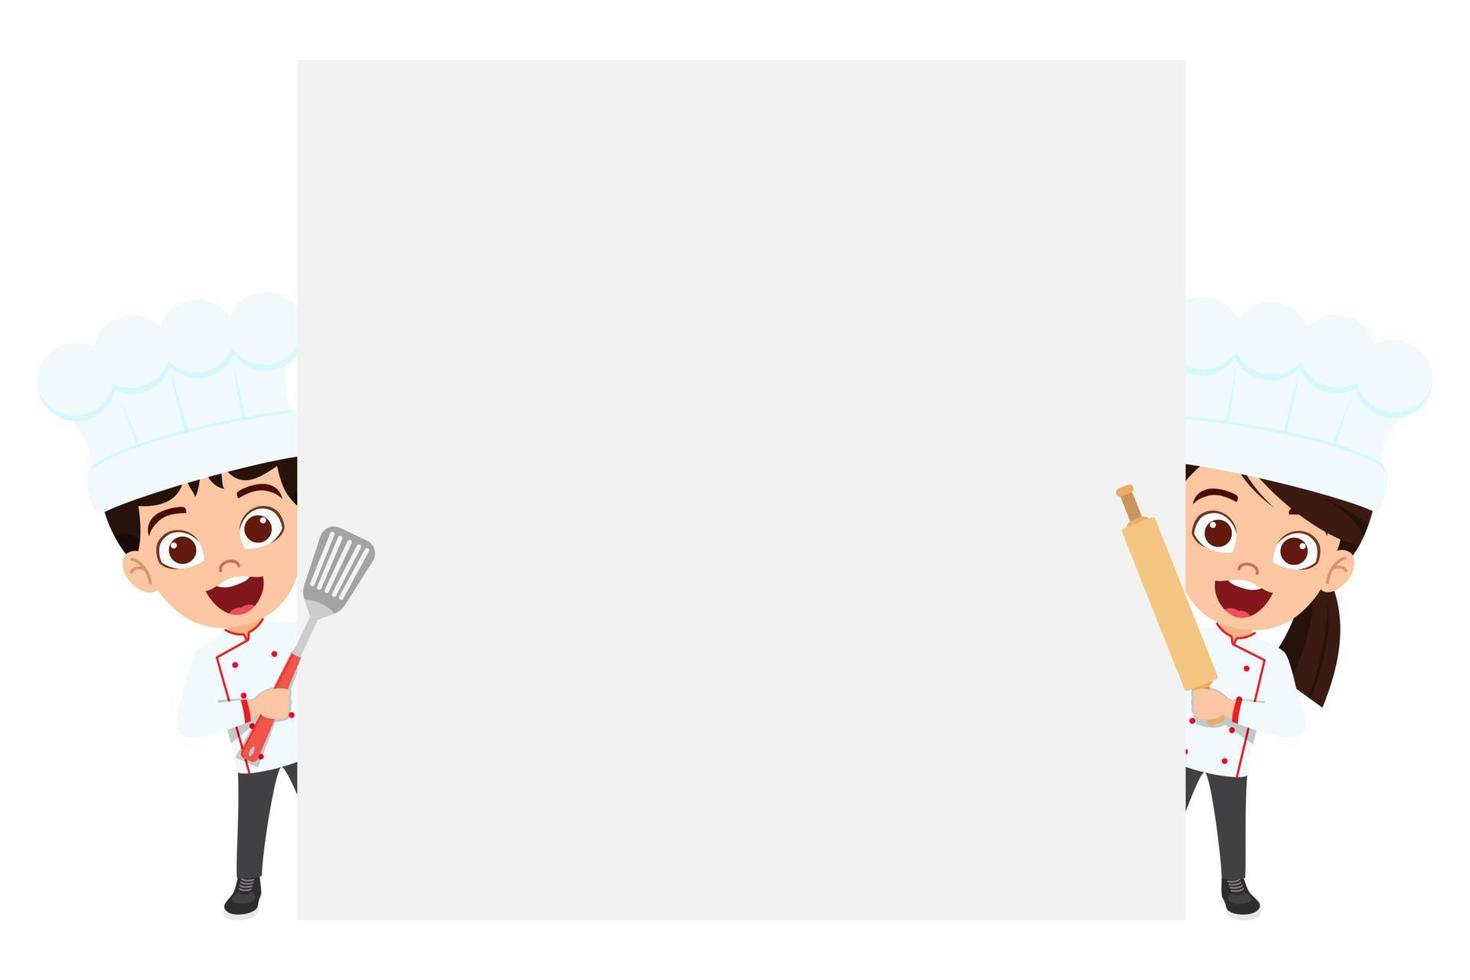 Happy cute kid boy and girl chef character wearing chef outfit standing behind blank placard with spoon and tools isolated vector